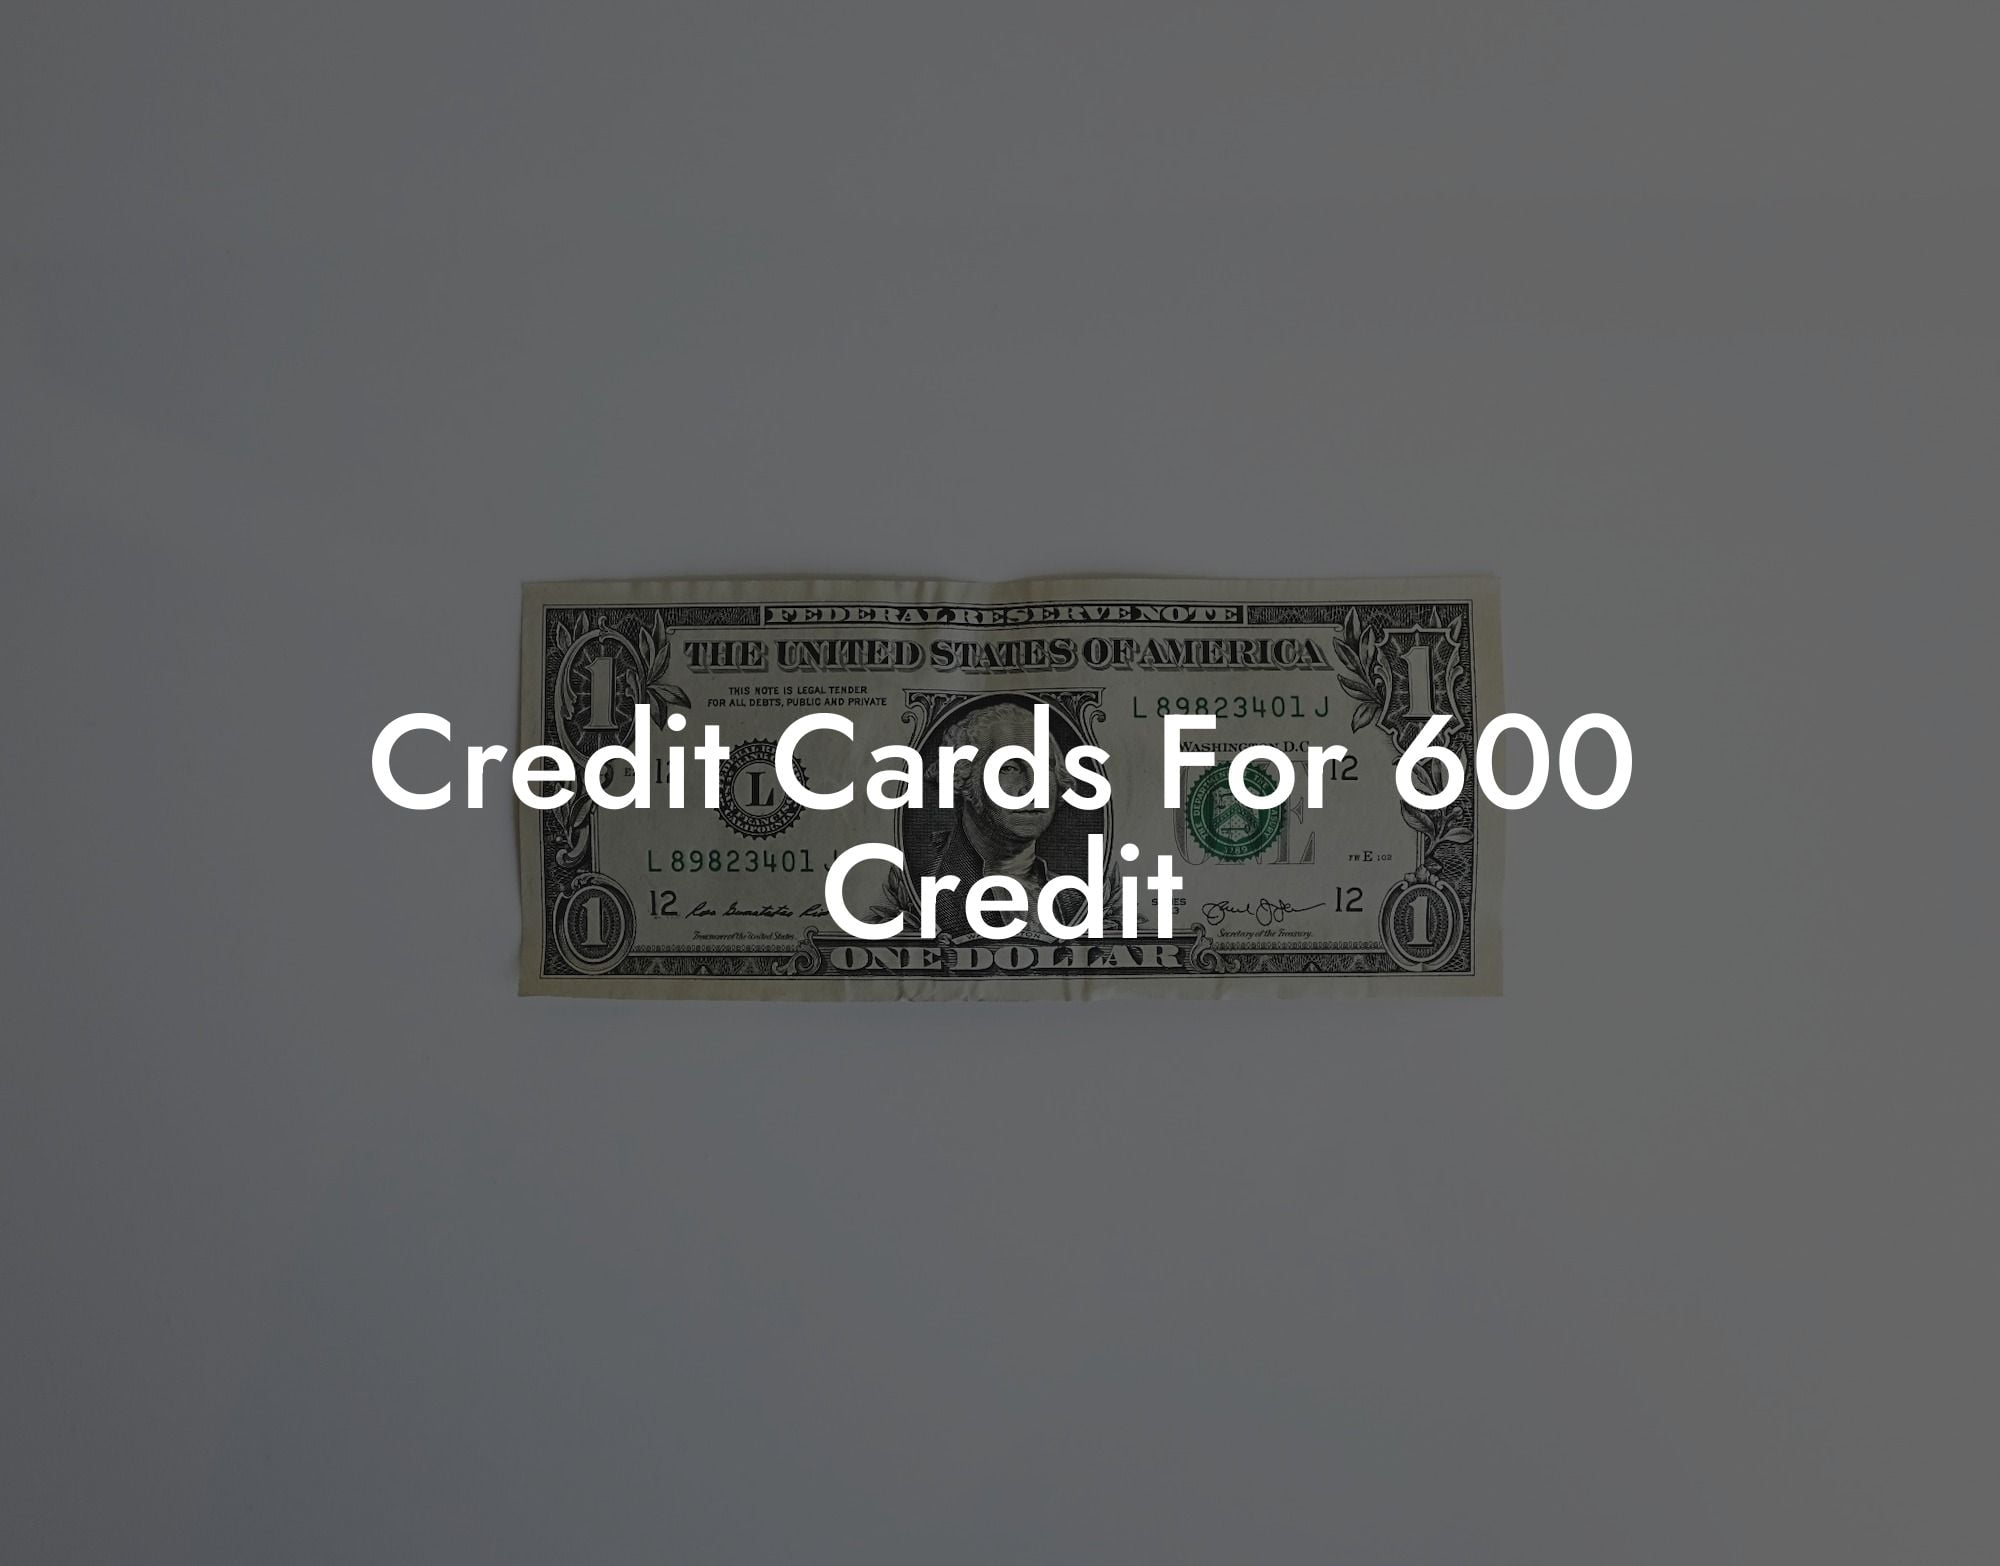 Credit Cards For 600 Credit